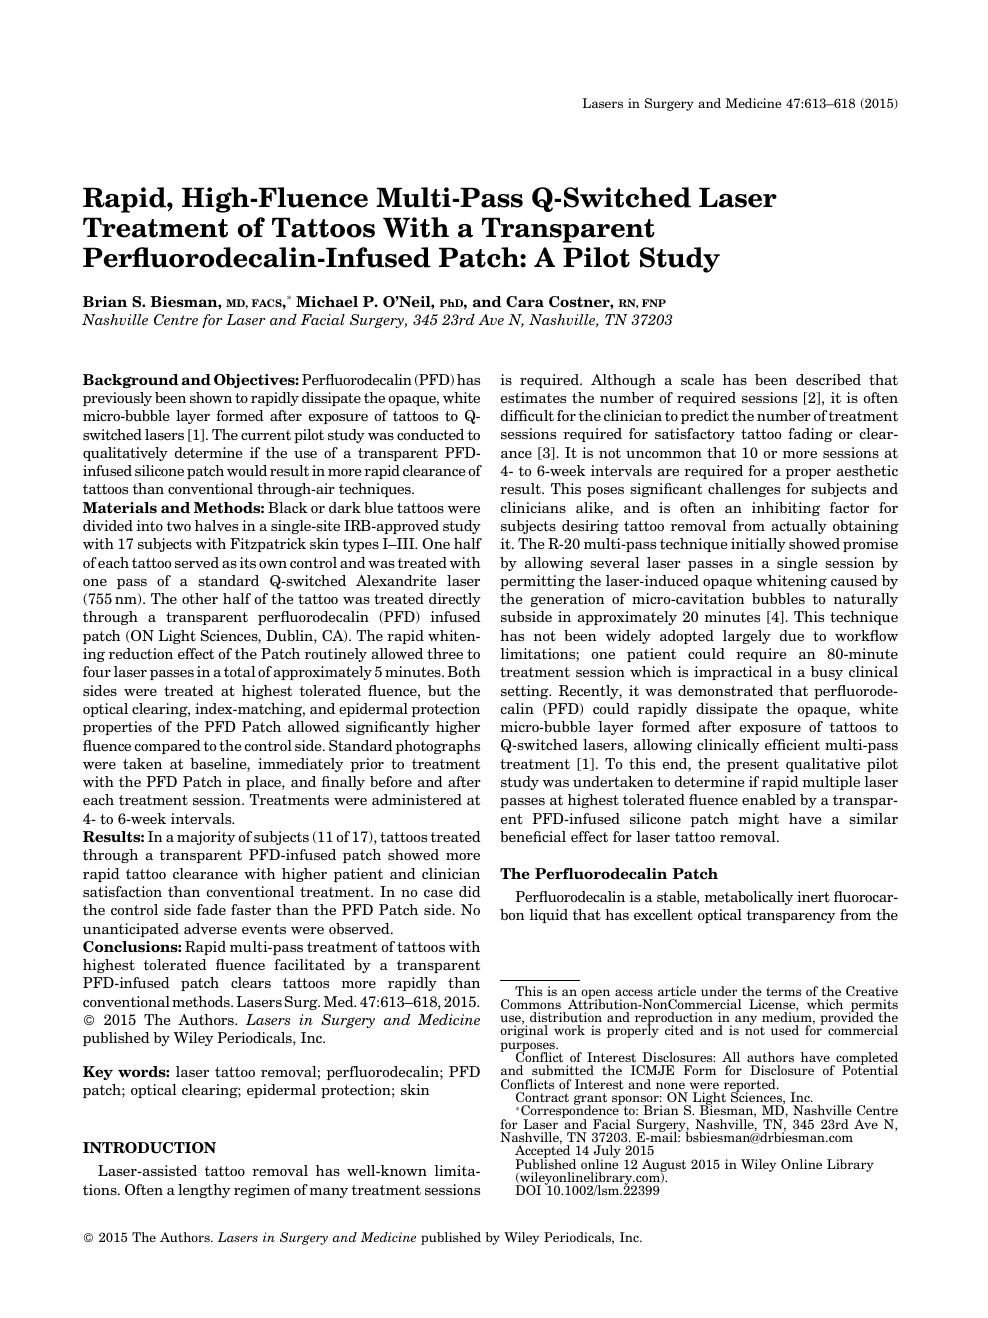 Rapid, high-fluence multi-pass q-switched laser treatment of tattoos with a transparent perfluorodecalin-infused patch A pilot study picture